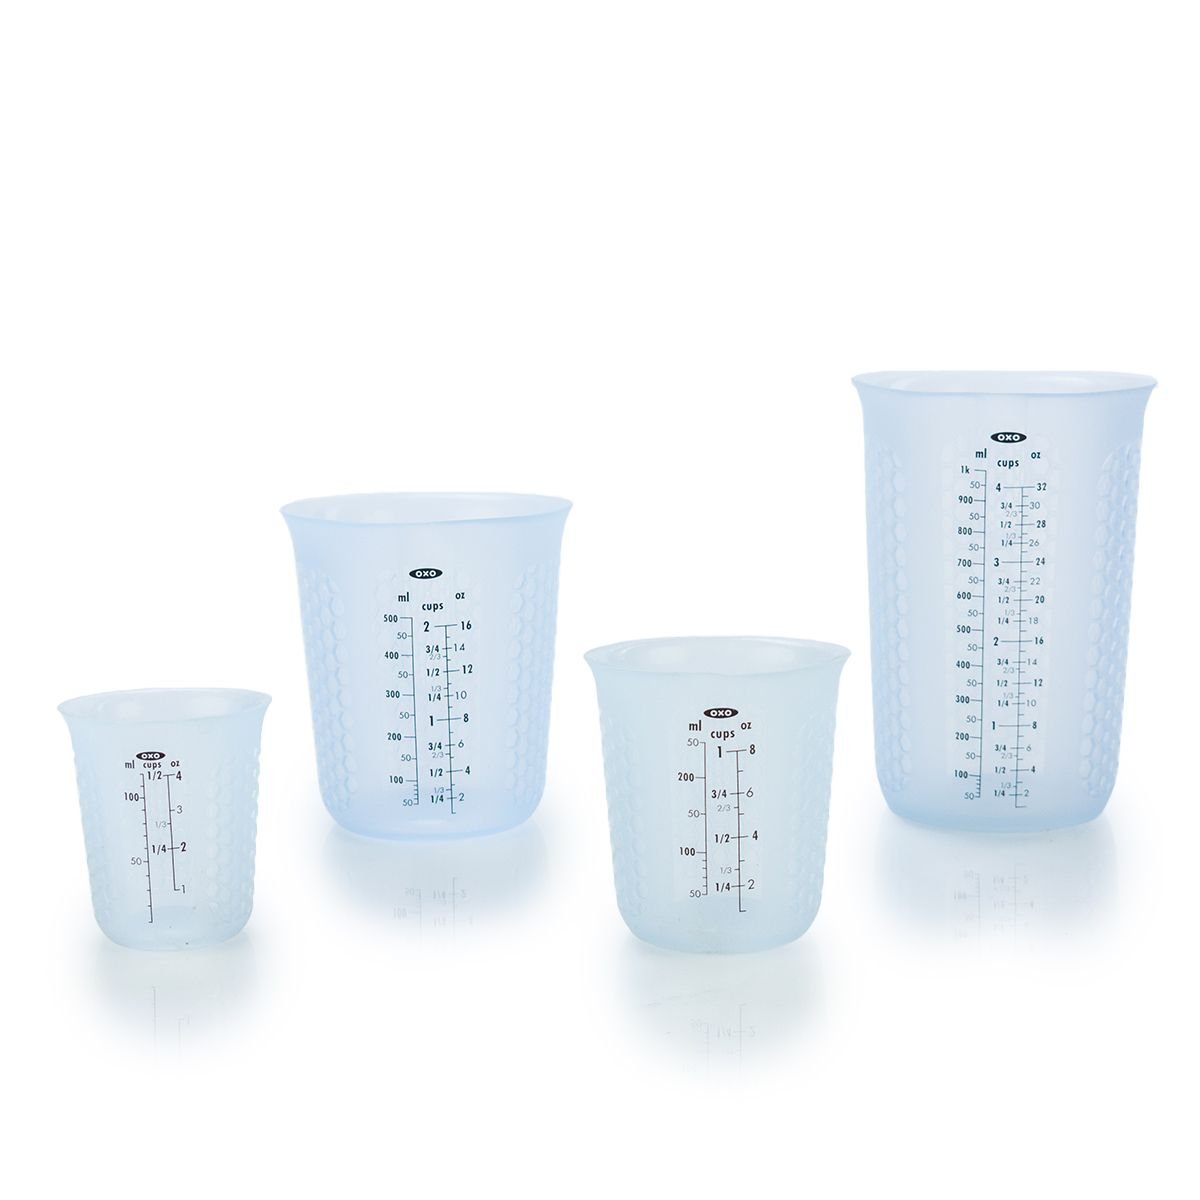 OXO 11161200 Good Grips 1/2 Cup Mini Squeeze & Pour Translucent Silicone  Measuring Cup